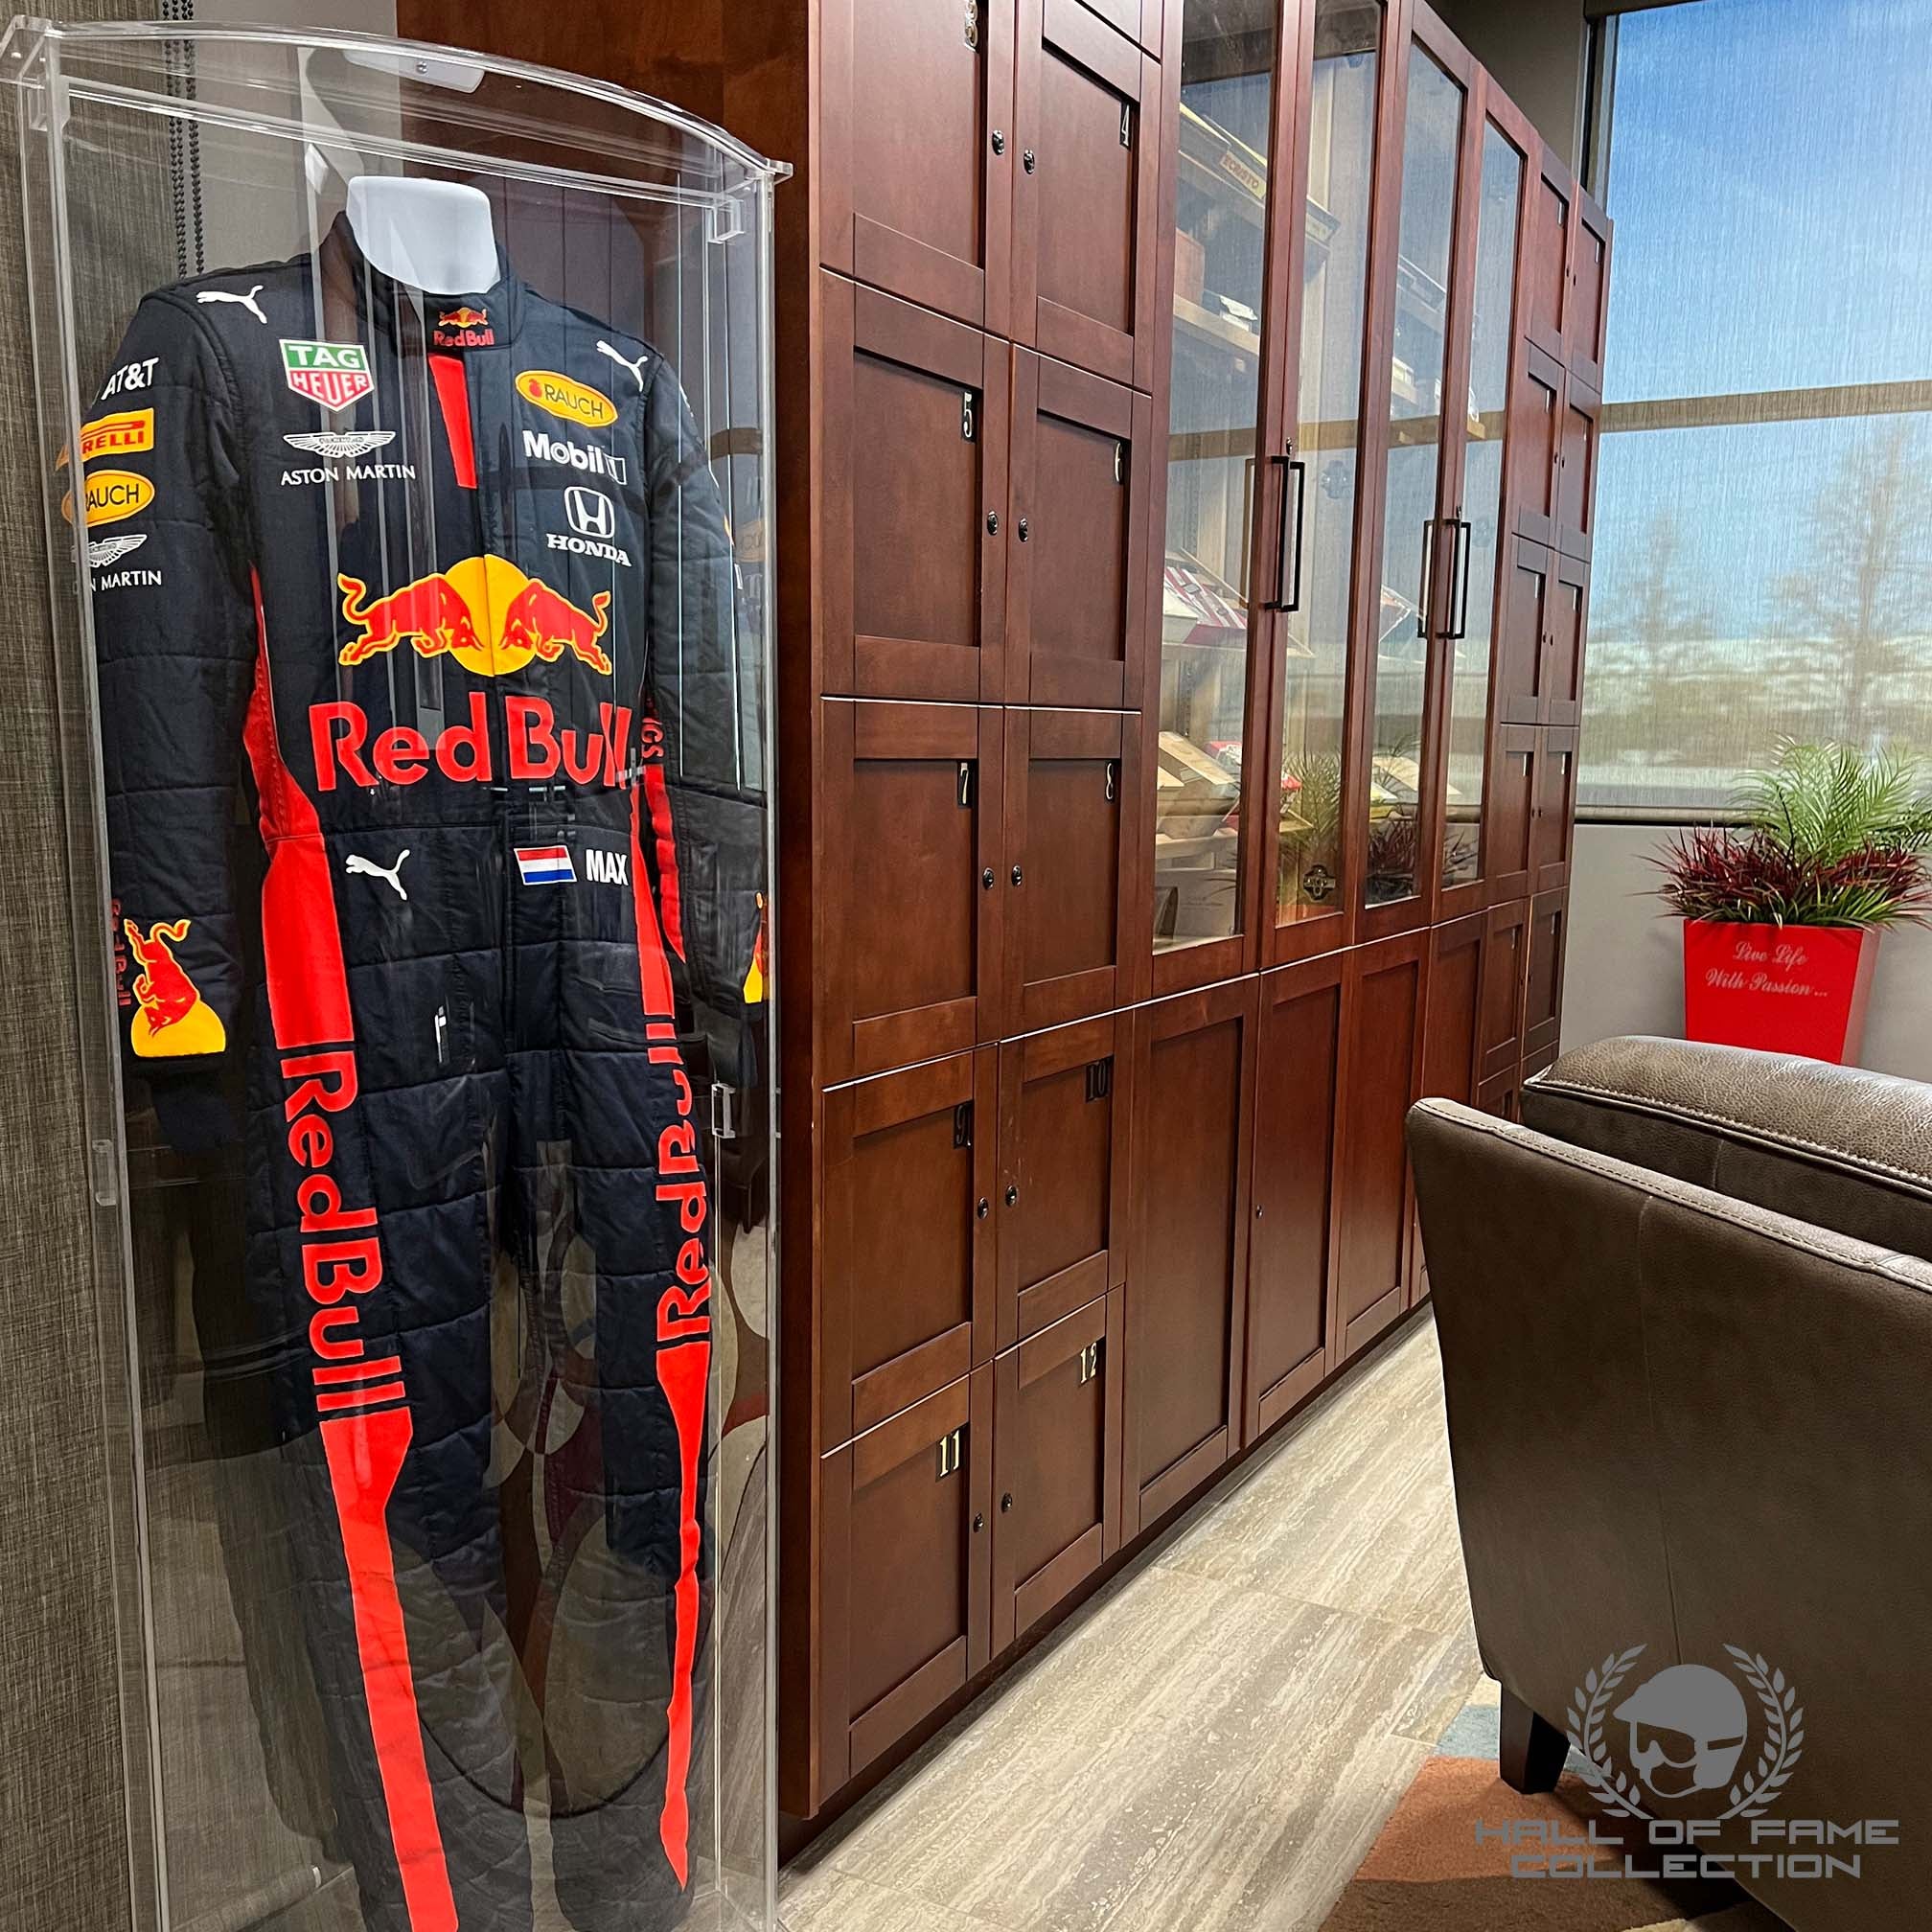 Full Size Hall Of Fame Collection Race Suit Display Case